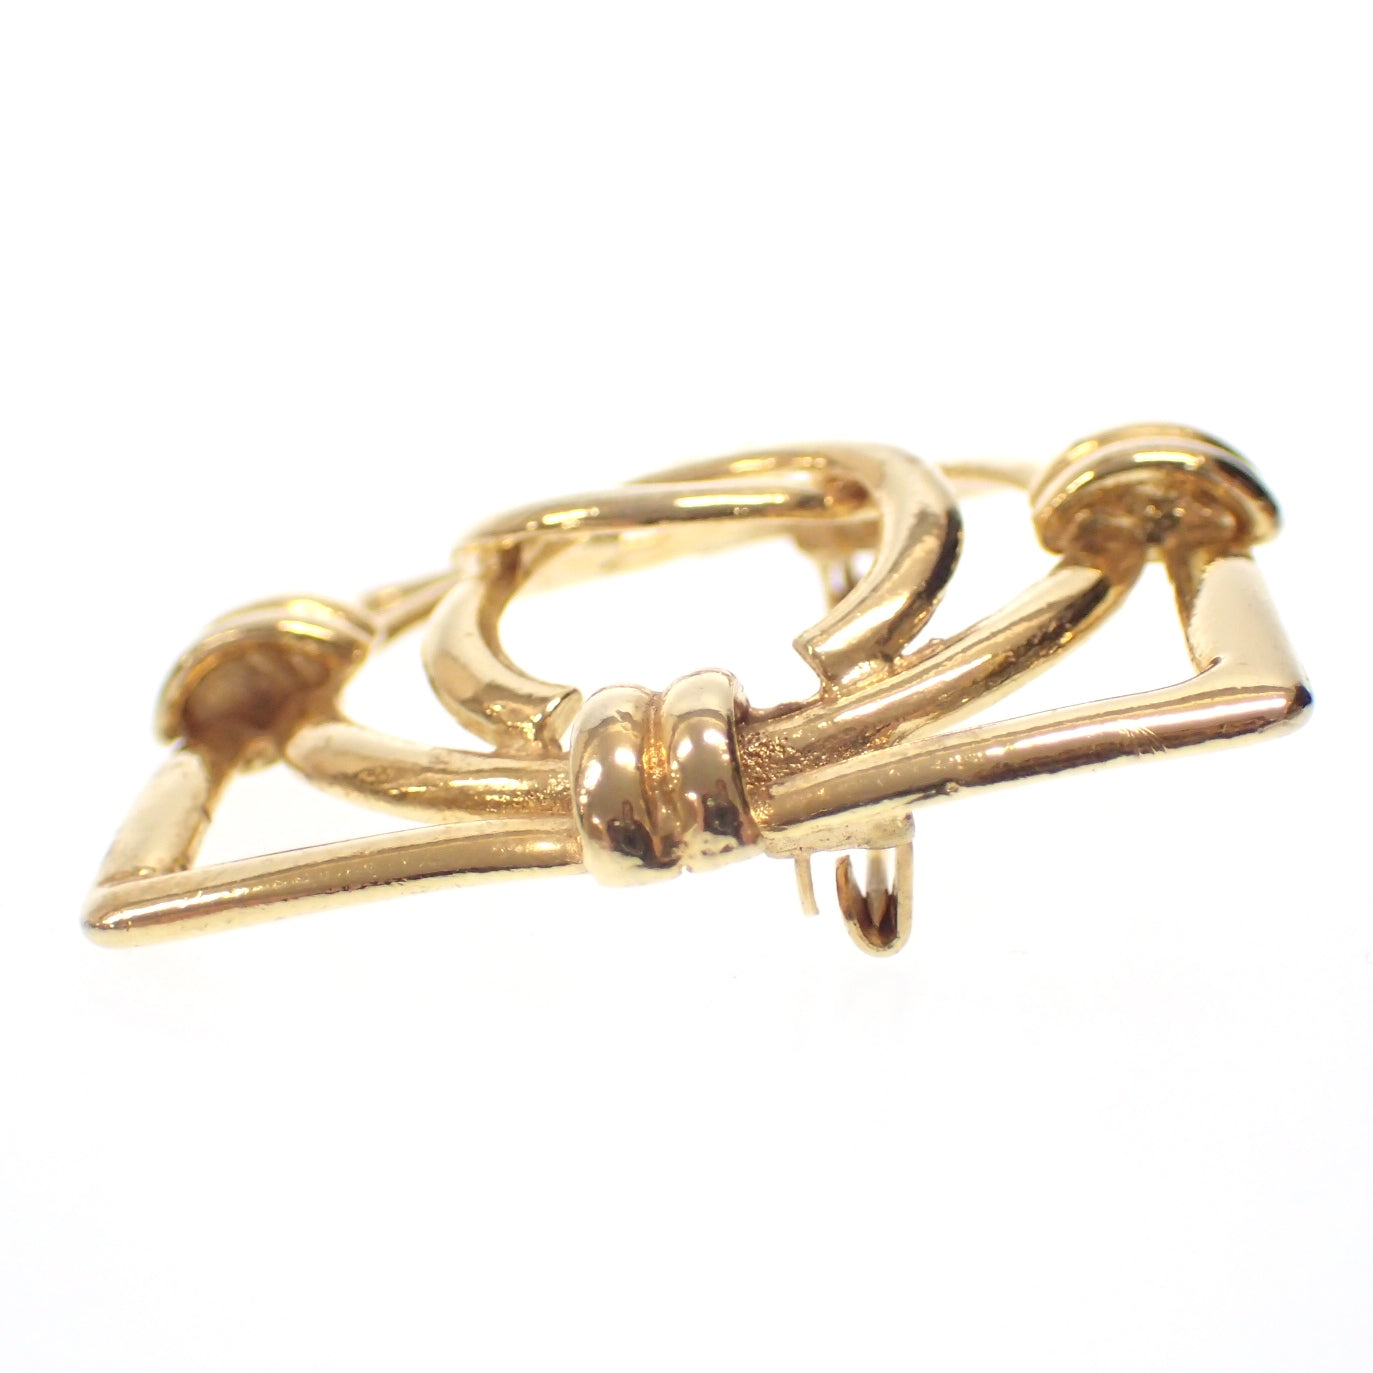 Good condition◆CHANEL brooch here mark vintage 29 gold CHANEL [AFI12] 